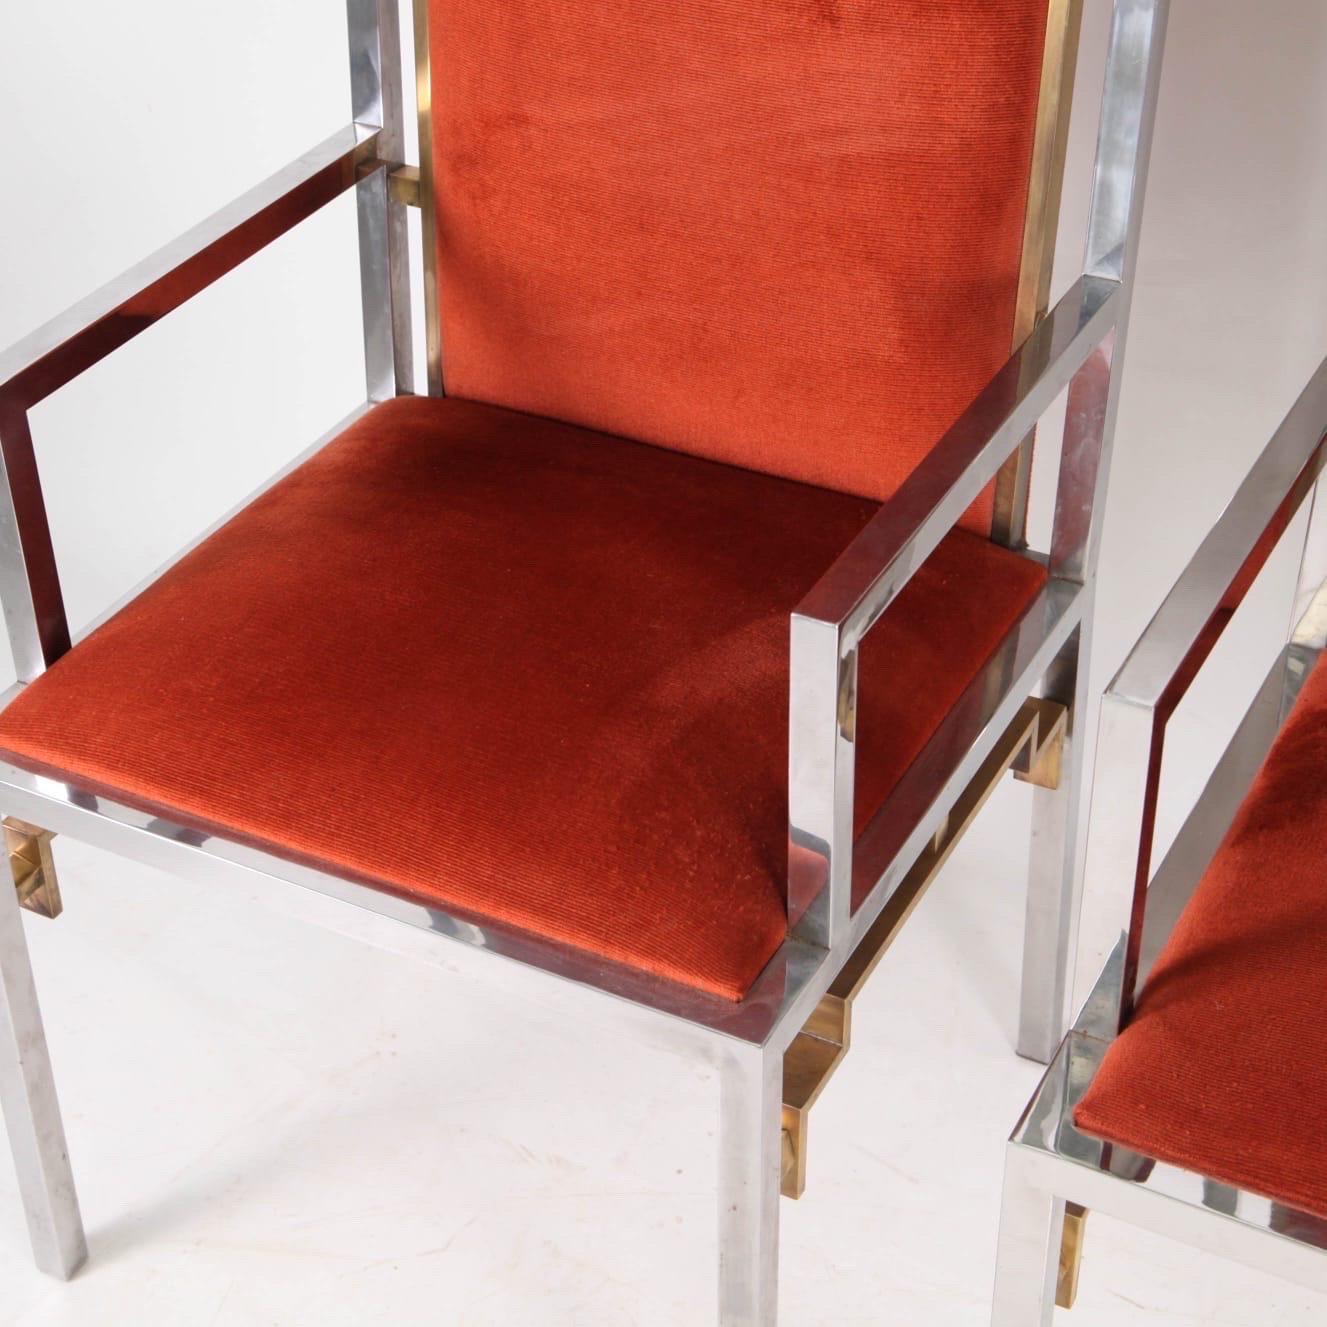 Exceptional pair of stainless steel and brass 1970s armchairs attributed to Romeo Rega.
Great quality and condition for this rare spectacular pair. 